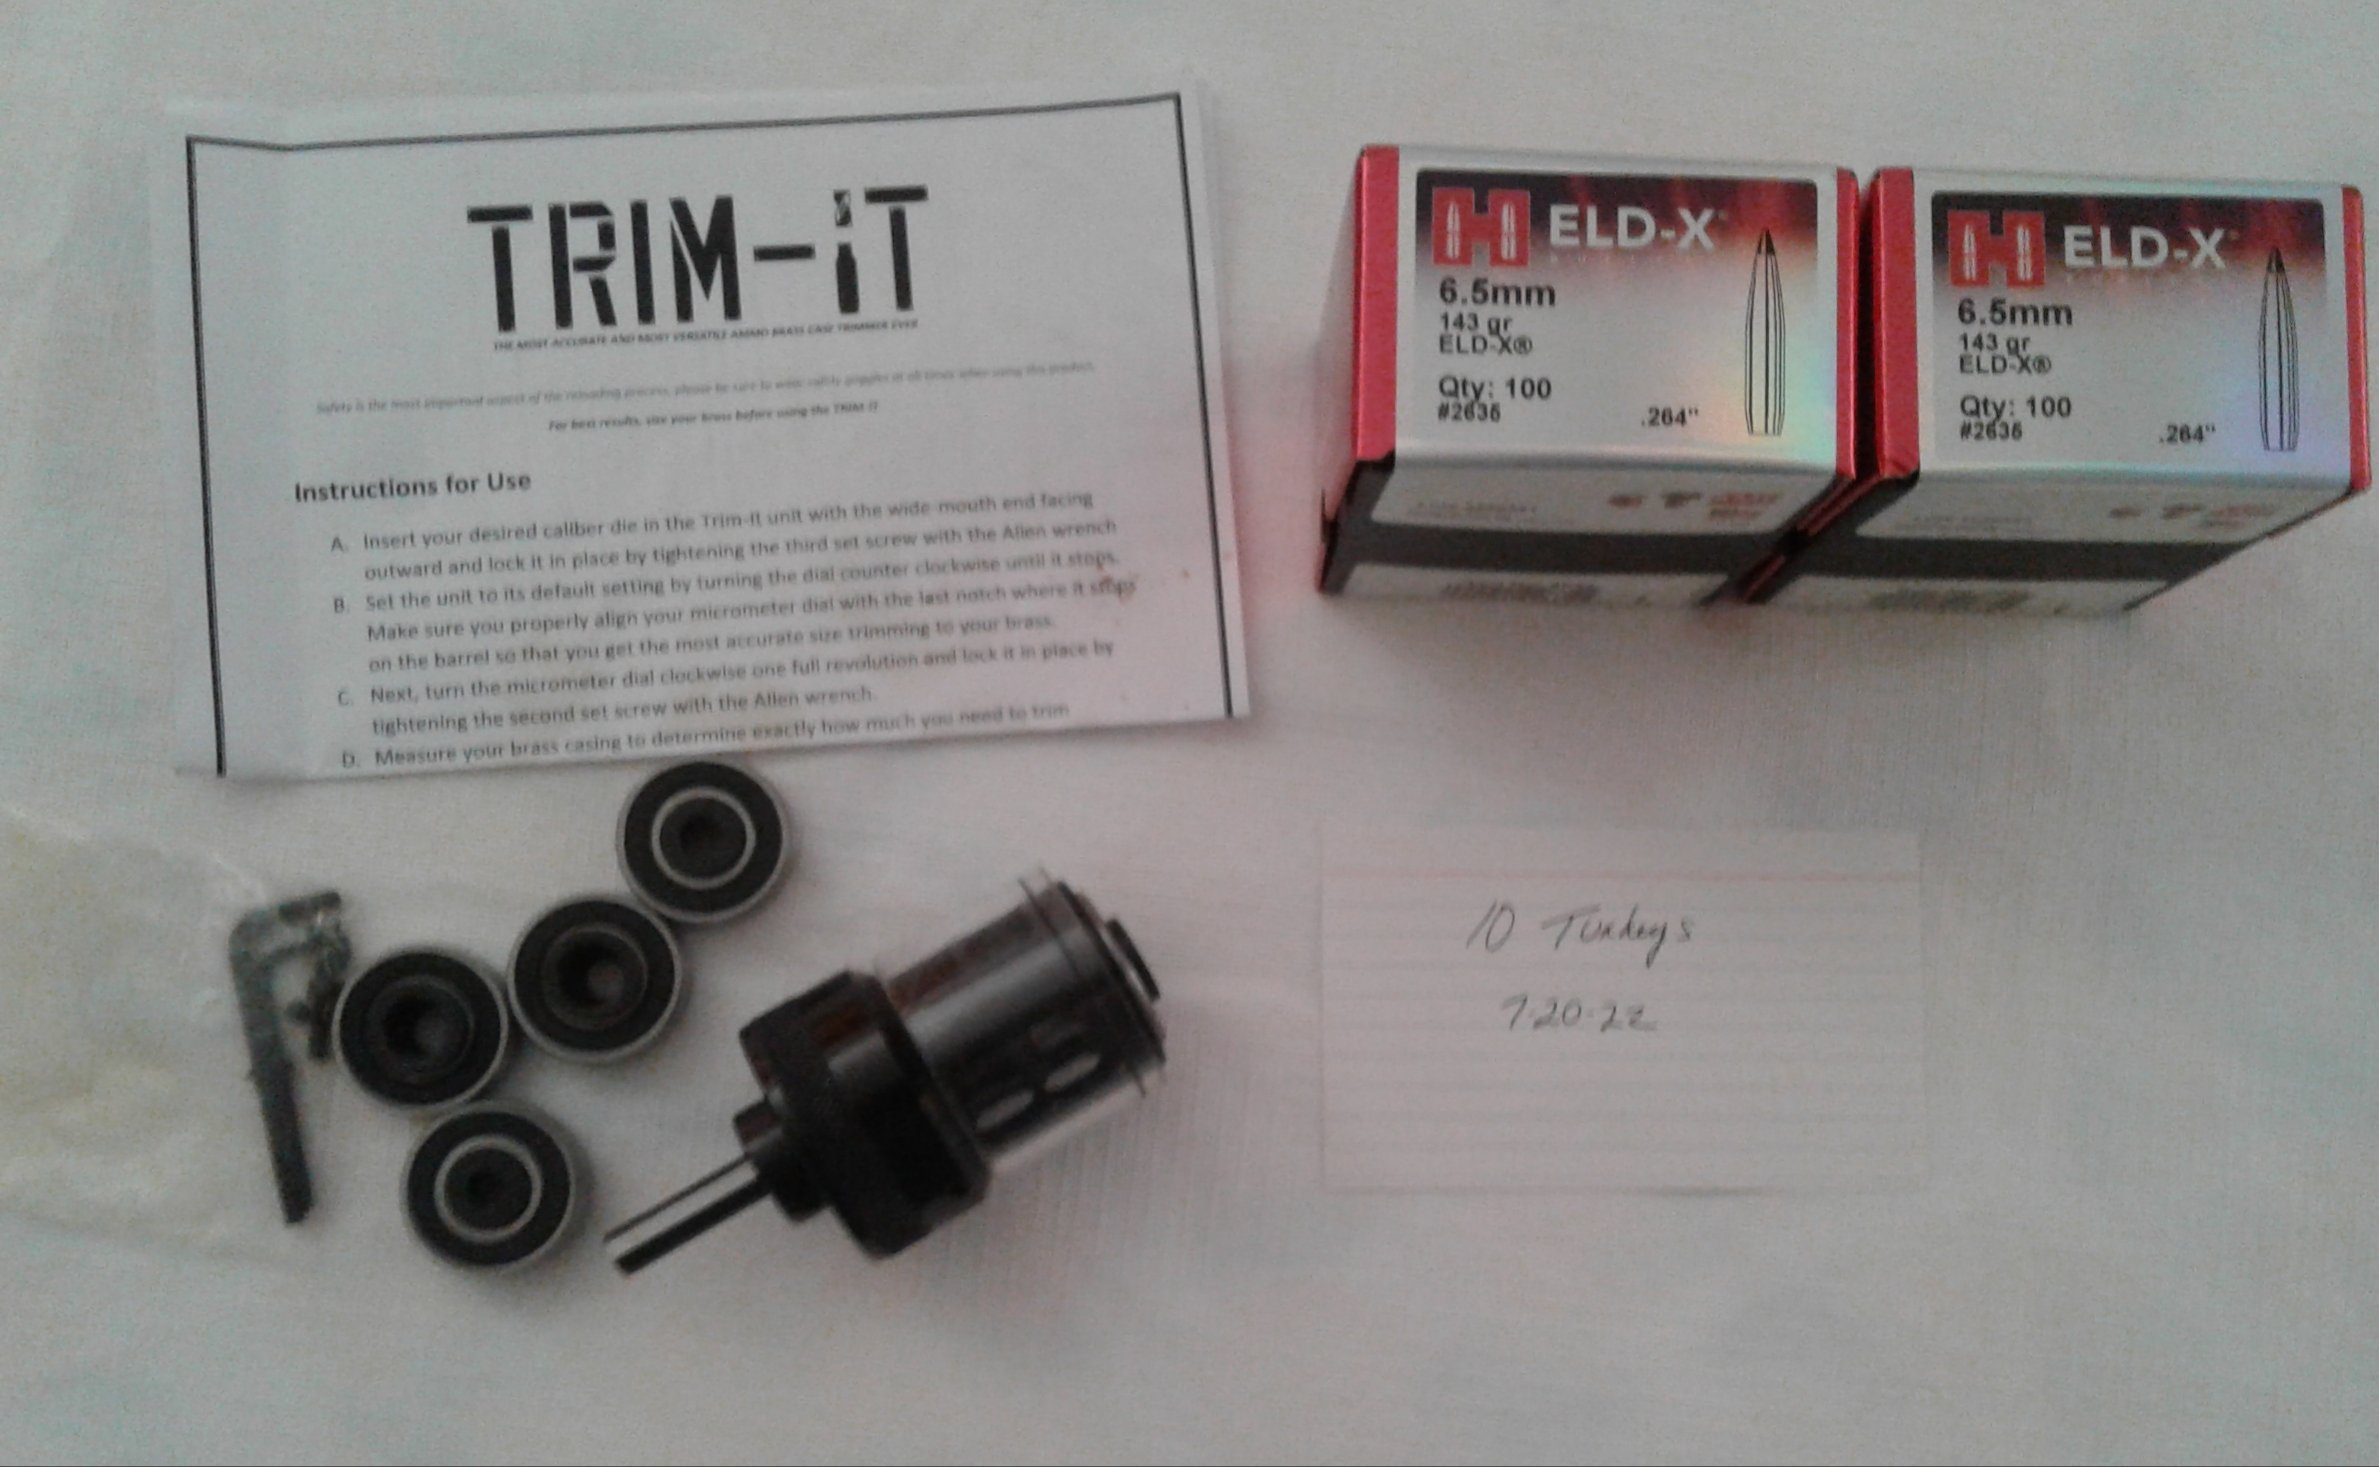 Black Widow Trimmer and Bullets - Classified Ads - CouesWhitetail.com ...